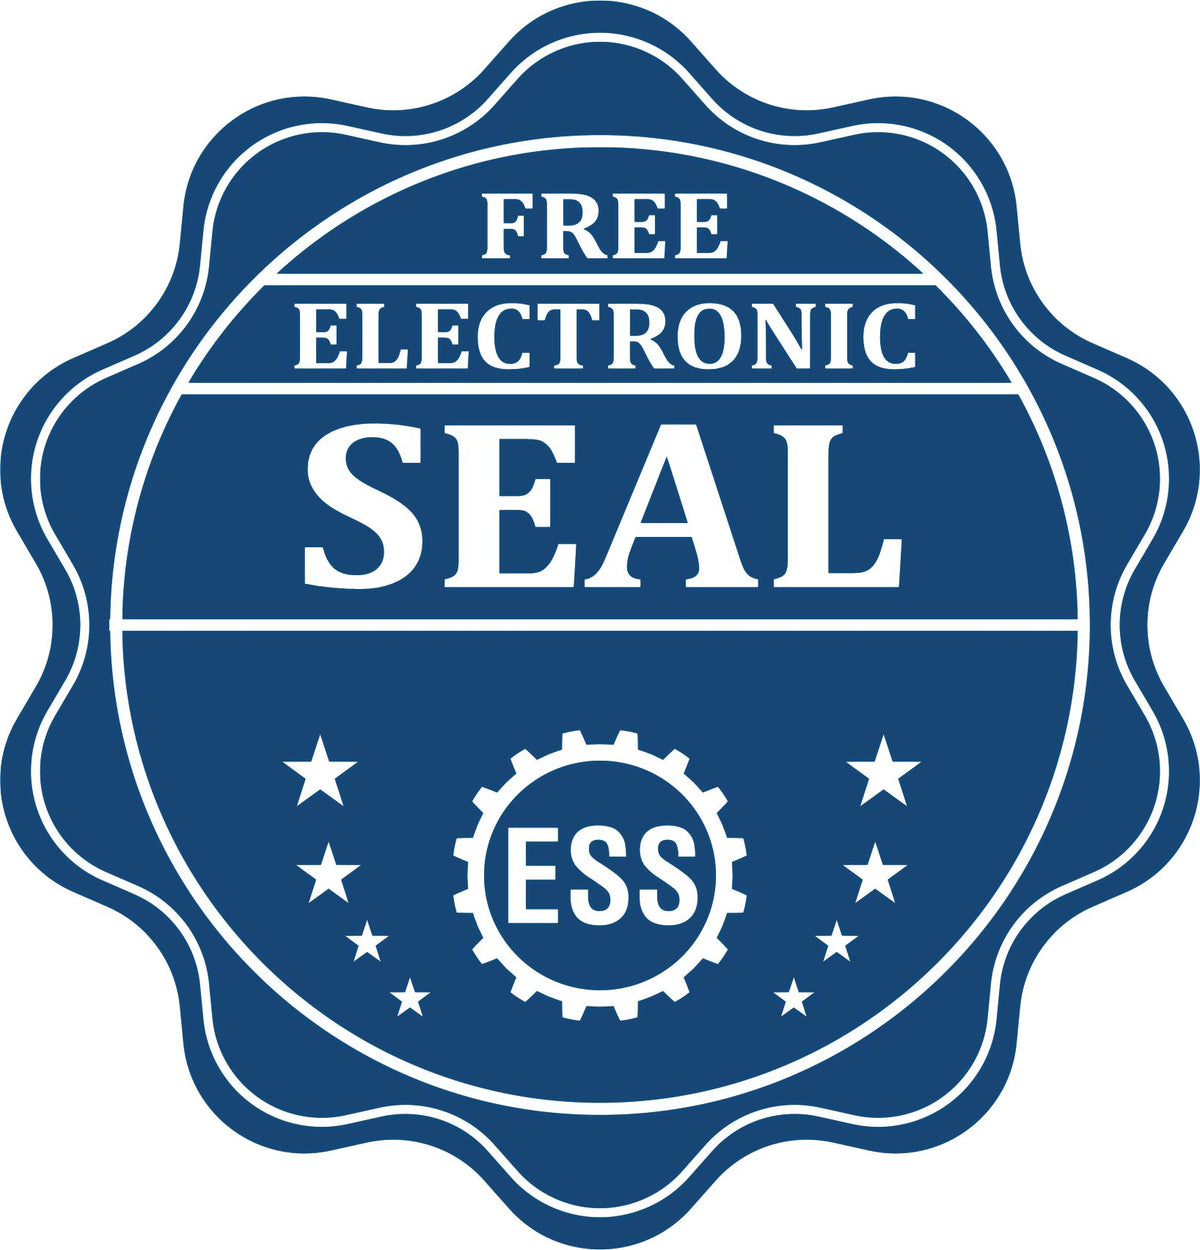 A badge showing a free electronic seal for the Heavy Duty Cast Iron Florida Geologist Seal Embosser with stars and the ESS gear on the emblem.